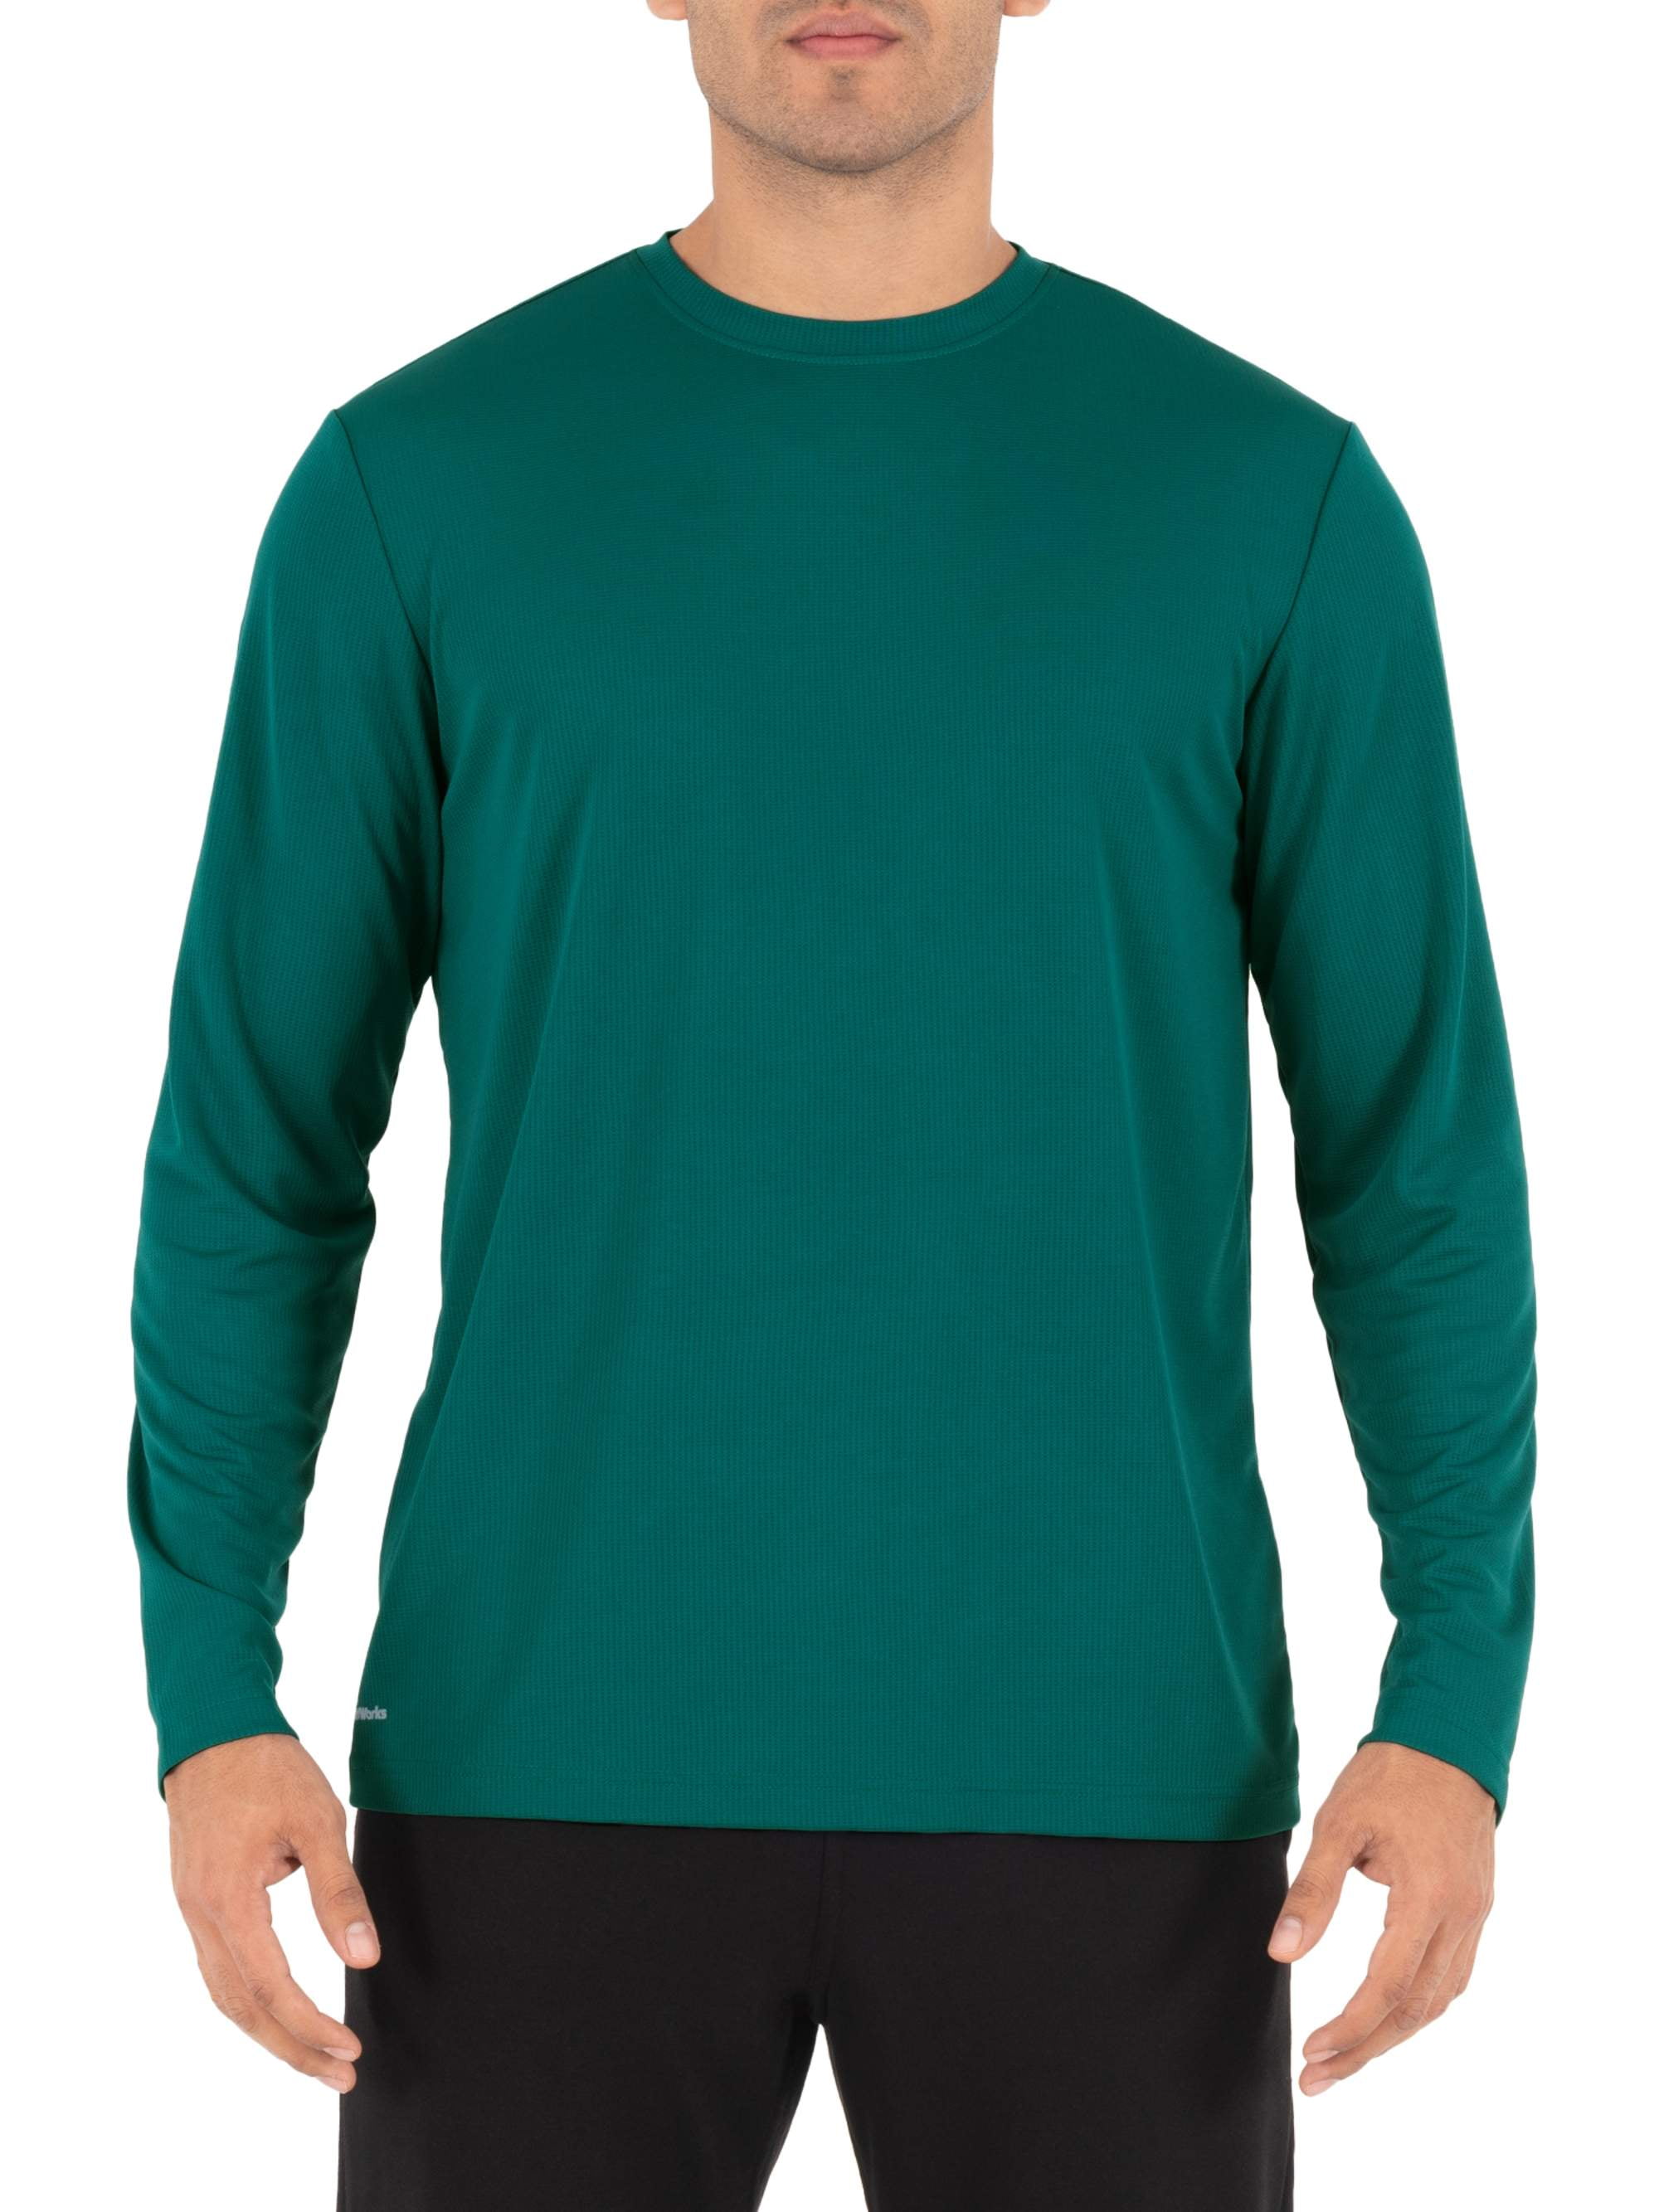 Security Cotton Long Sleeve t Shirts with Reflective Decoration on Both Front and Back, 